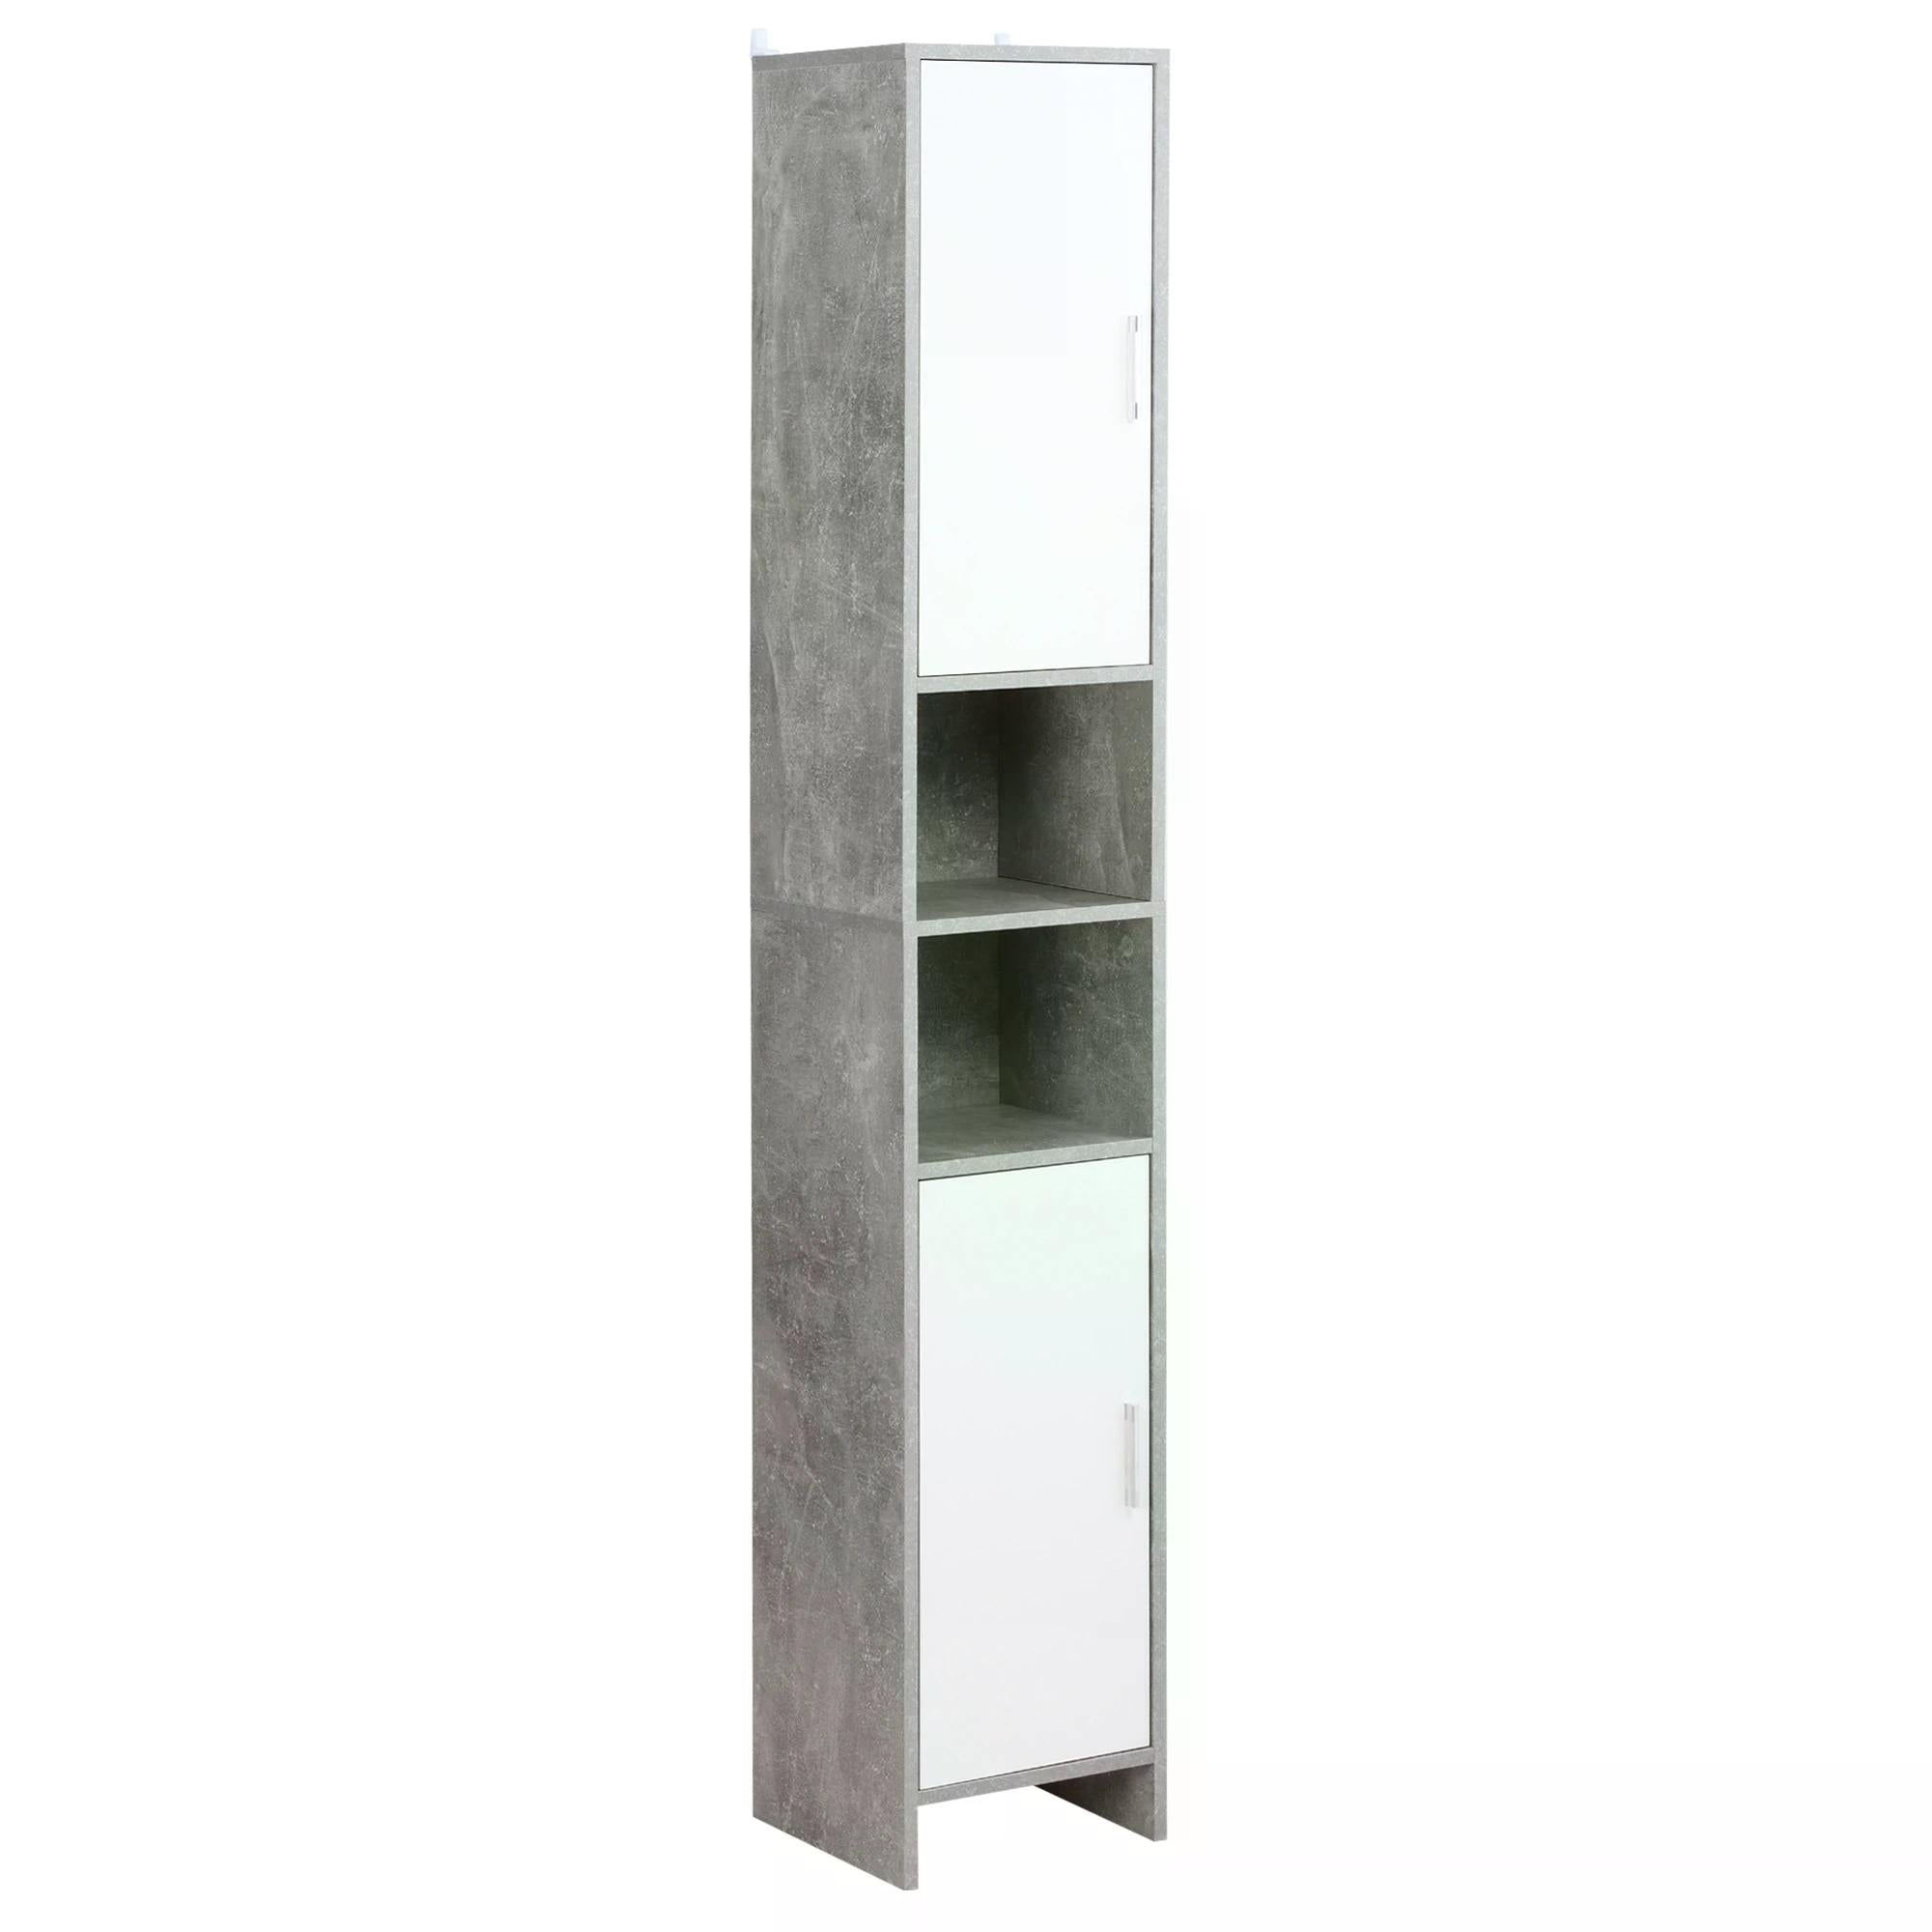 Free-standing Tall Bathroom Storage Cabinet w/ 2 Cupboards 2 Open Compartments, Slim Bathroom Organizer Adjustable Shelves Elevated Base-Grey-0